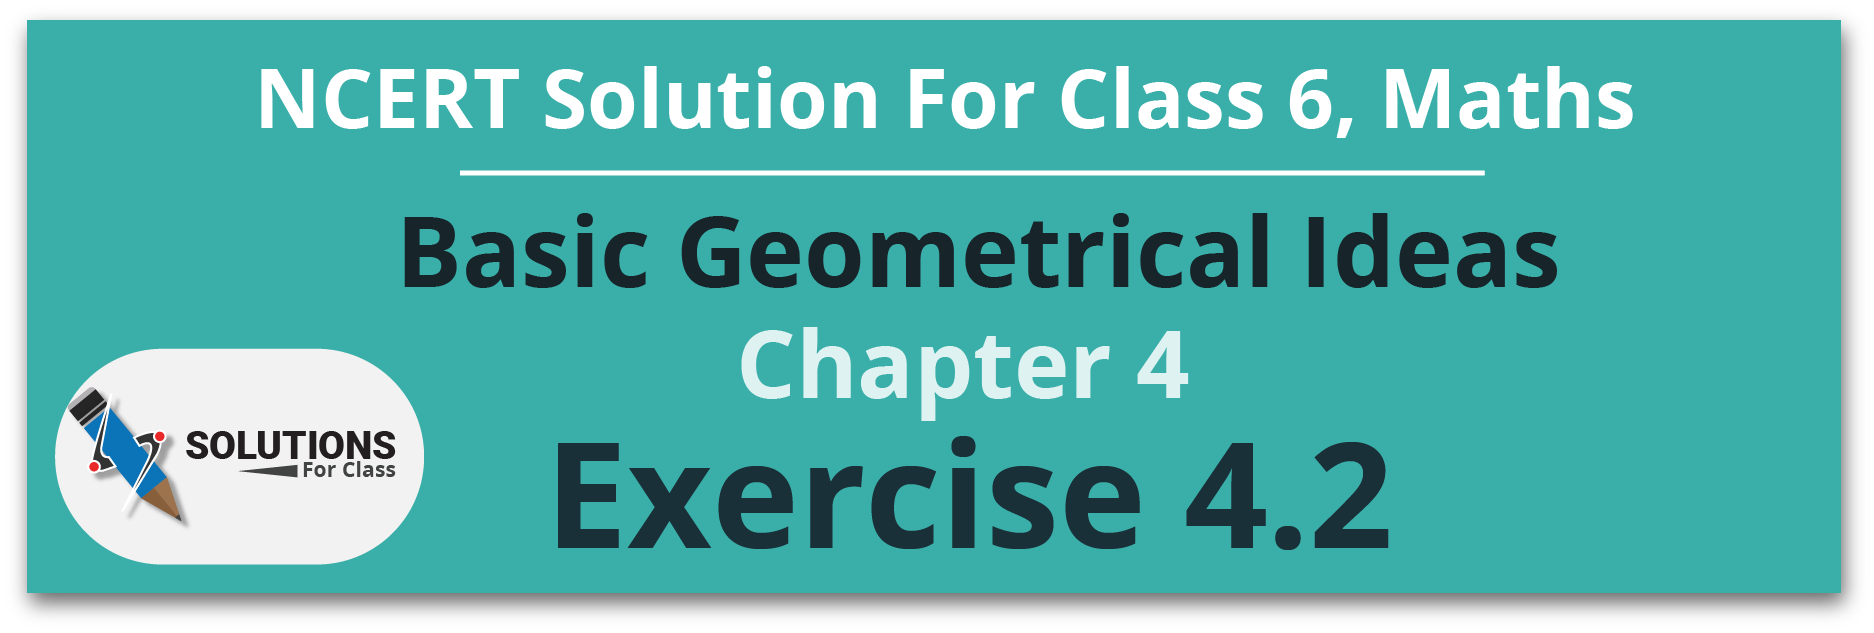 NCERT Solutions For Class 6 Maths, Chapter 4, Basic Geometrical Ideas, Exercise 4.2​